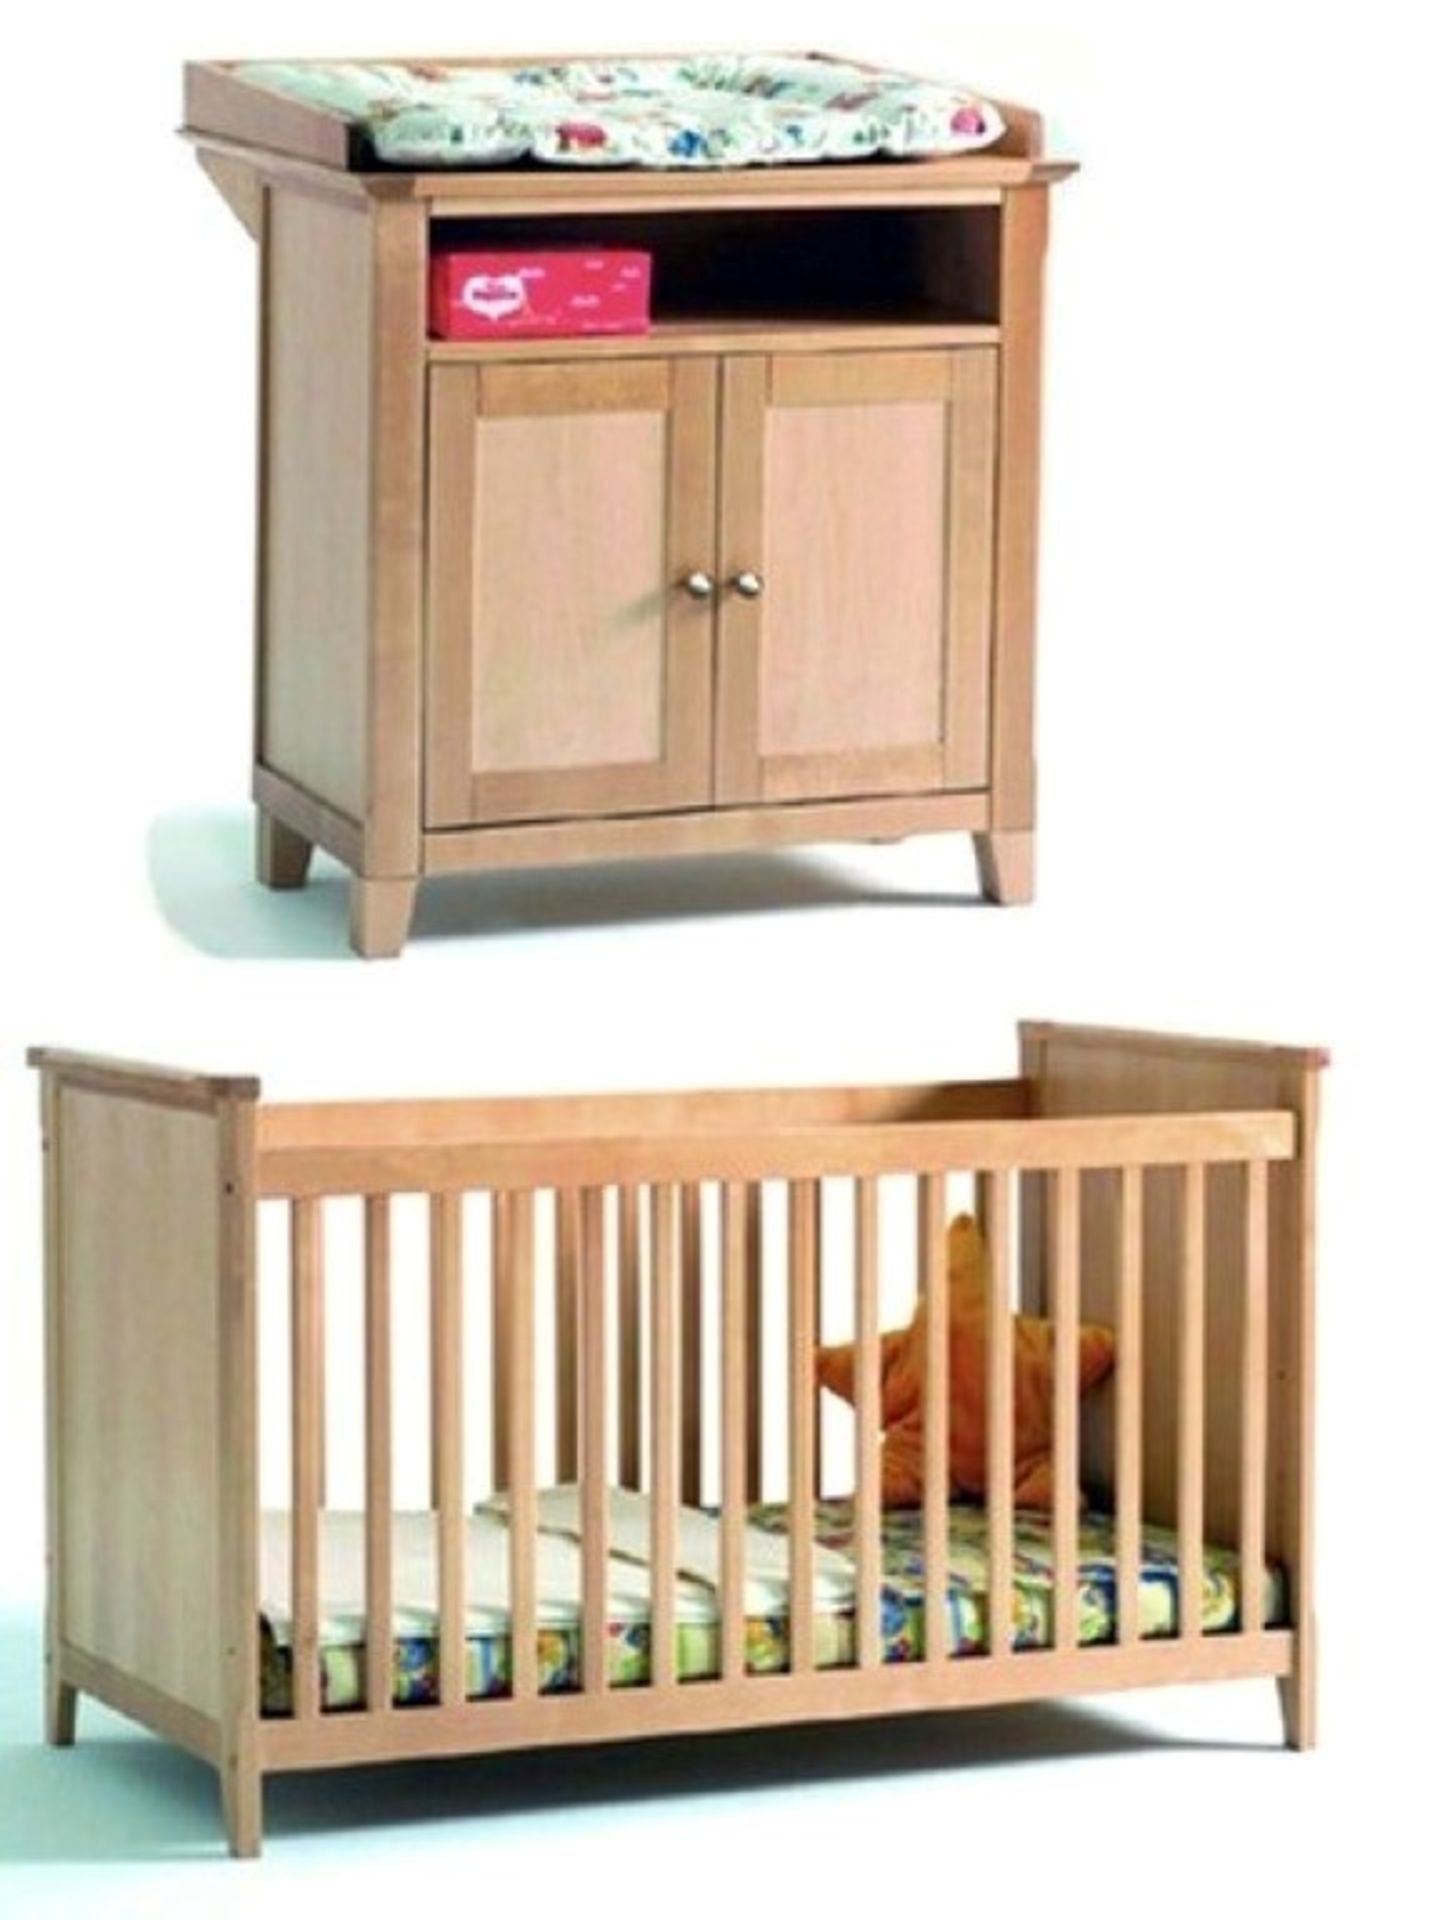 1 x Vienna Solid Wood Nursery Furniture Set - Birch - Includes Baby Changing Unit & Cot Brand - Image 4 of 4